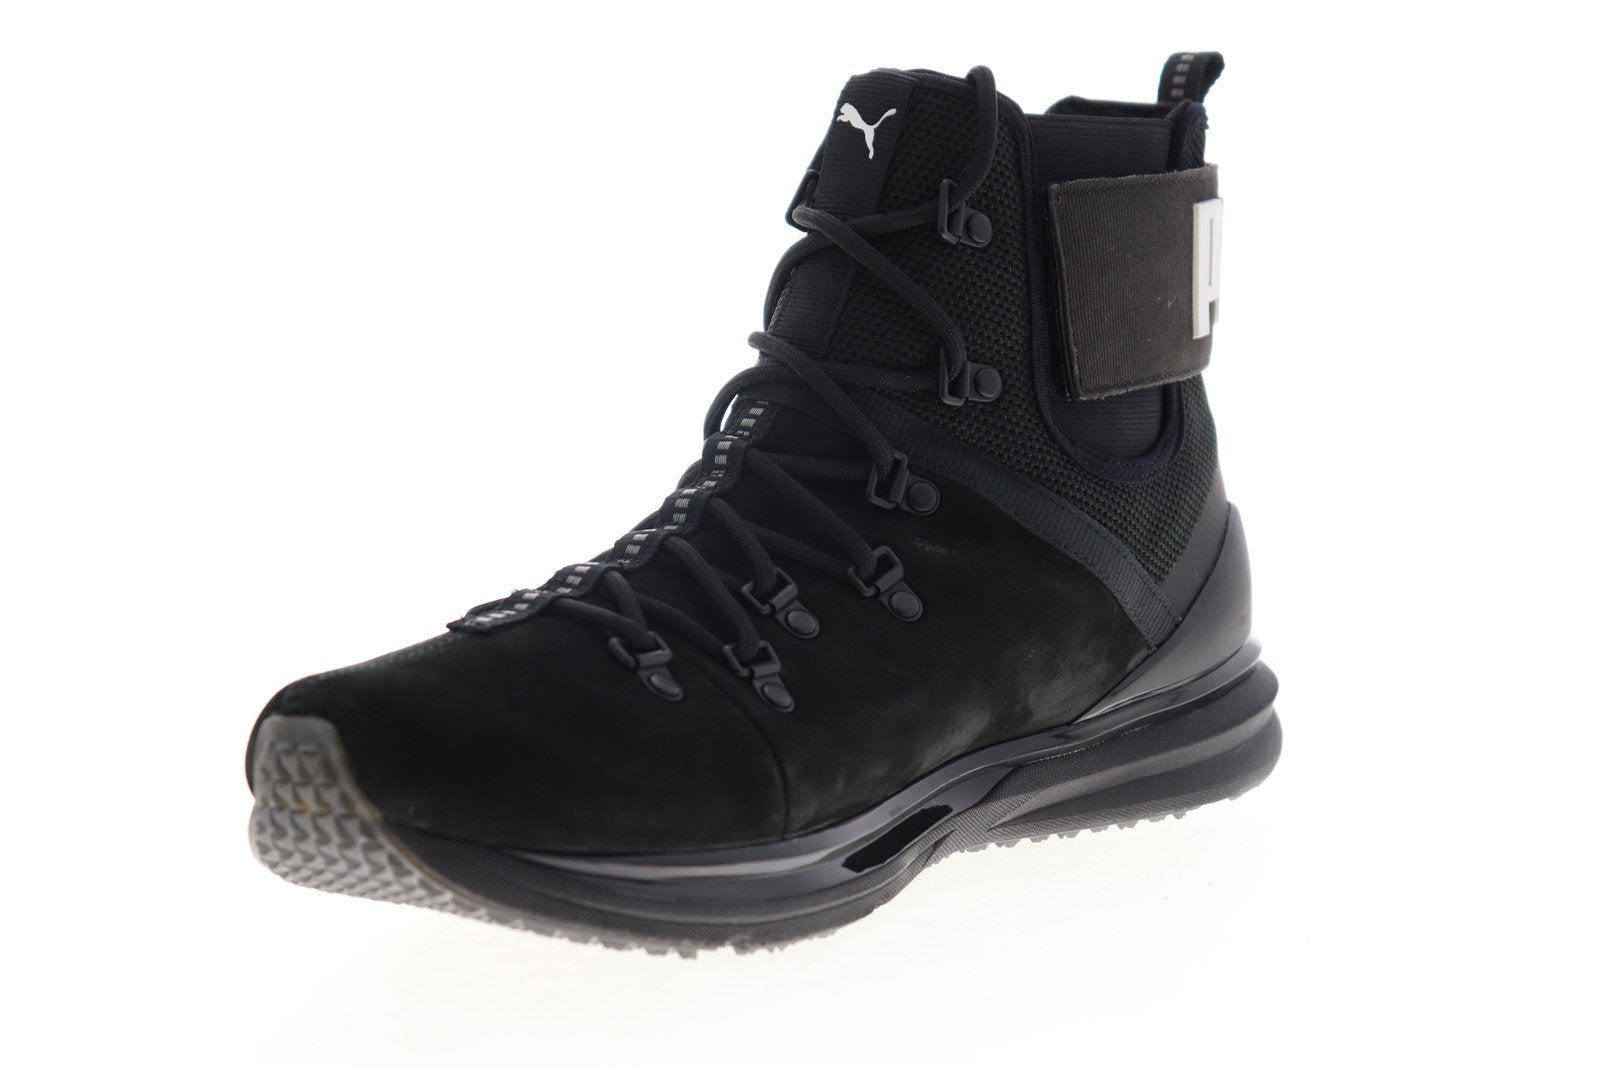 Limitless leather boots